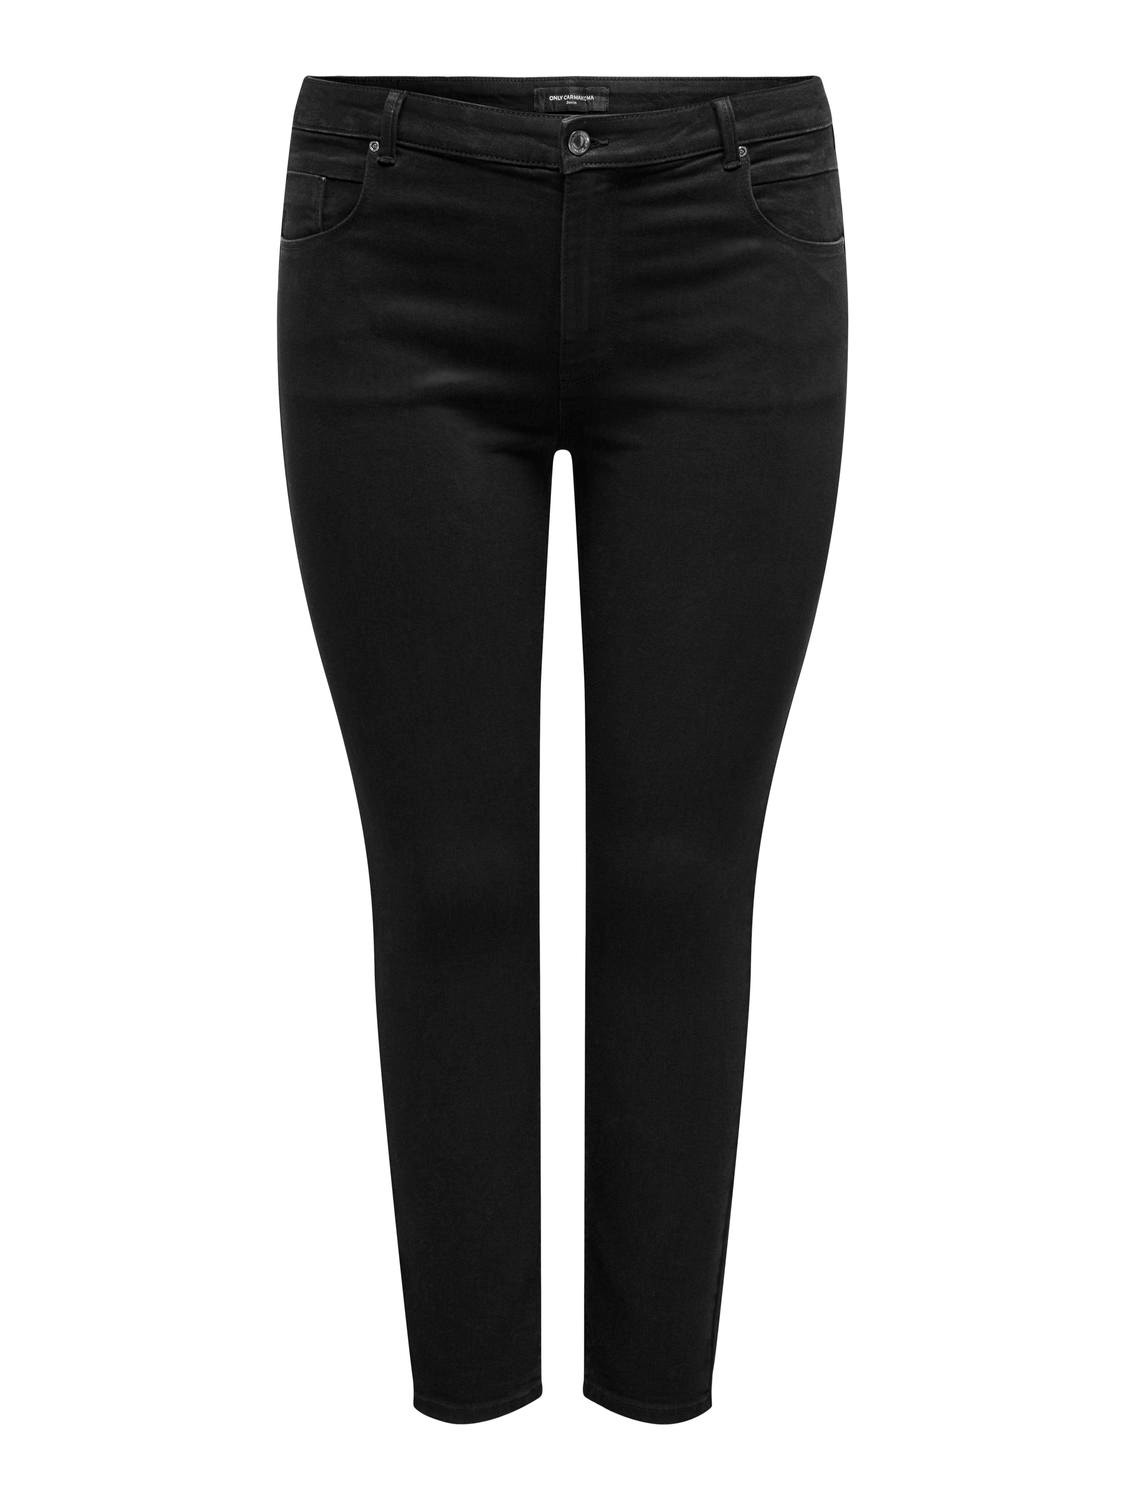 ONLY Skinny Fit Mittlere Taille Jeans -Black Denim - 15300125